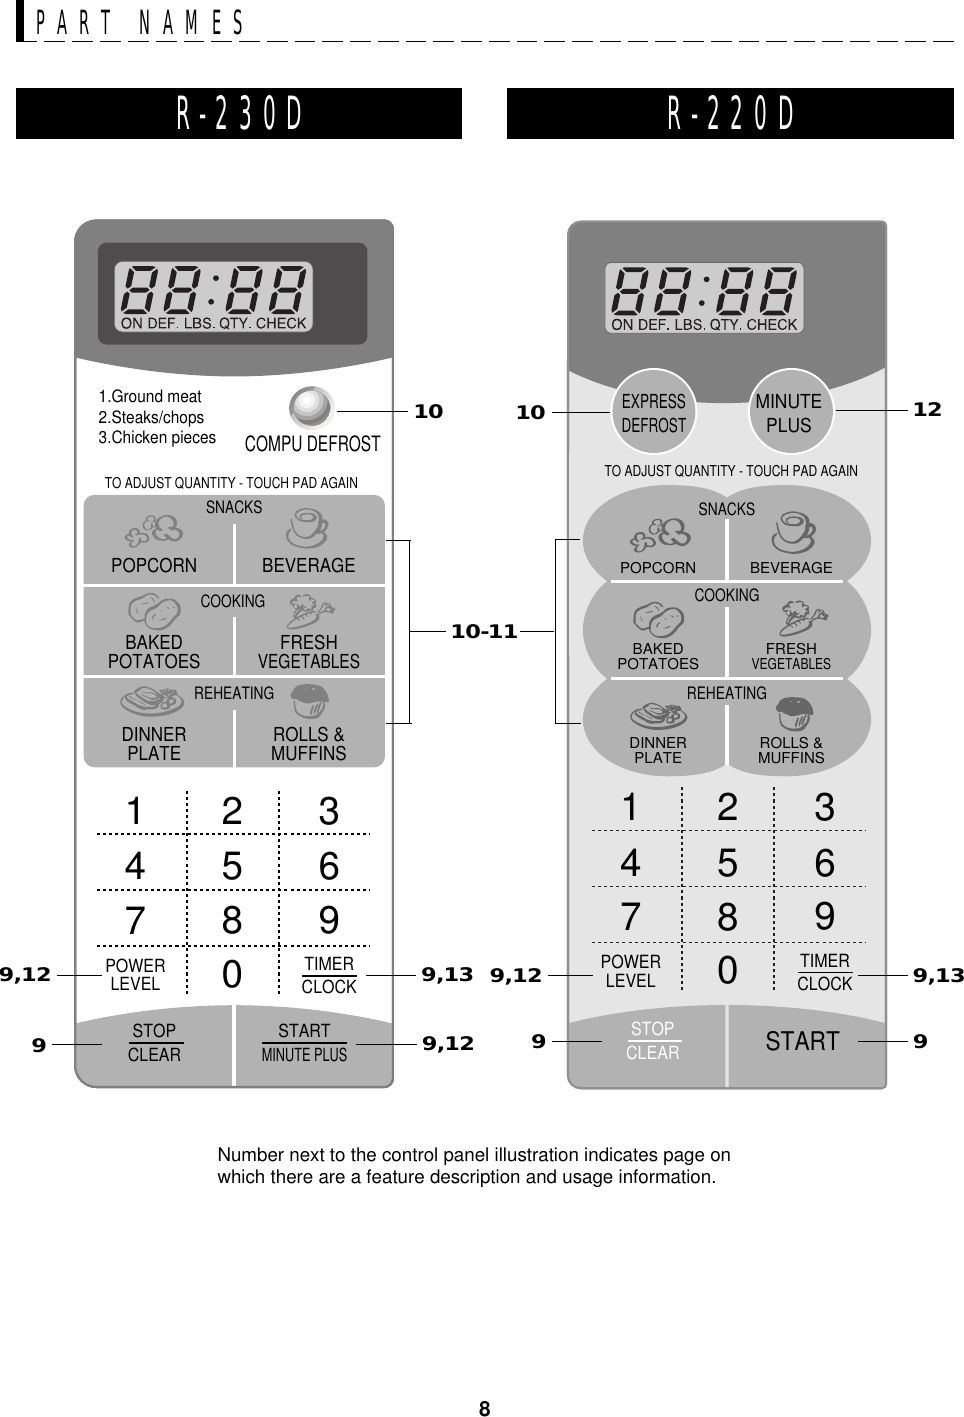 8Number next to the control panel illustration indicates page onwhich there are a feature description and usage information.PART NAMESR-230D R-220D1234567890POWERLEVEL TIMERCLOCK1.Ground meat2.Steaks/chops3.Chicken piecesCOMPU DEFROSTTO ADJUST QUANTITY - TOUCH PAD AGAINSNACKSCOOKINGREHEATINGPOPCORN BEVERAGEBAKED FRESHPOTATOESVEGETABLESDINNERPLATE ROLLS &amp;MUFFINSSTOPCLEARSTARTMINUTE PLUSTO ADJUST QUANTITY - TOUCH PAD AGAINSNACKSCOOKINGREHEATINGPLATE MUFFINSBEVERAGEPOPCORNBAKED FRESHPOTATOESVEGETABLESDINNER ROLLS &amp;EXPRESSDEFROSTMINUTEPLUS1234567890POWERLEVEL TIMERCLOCKSTARTSTOPCLEAR9,139,139,12 912999,12 9,1210-111010